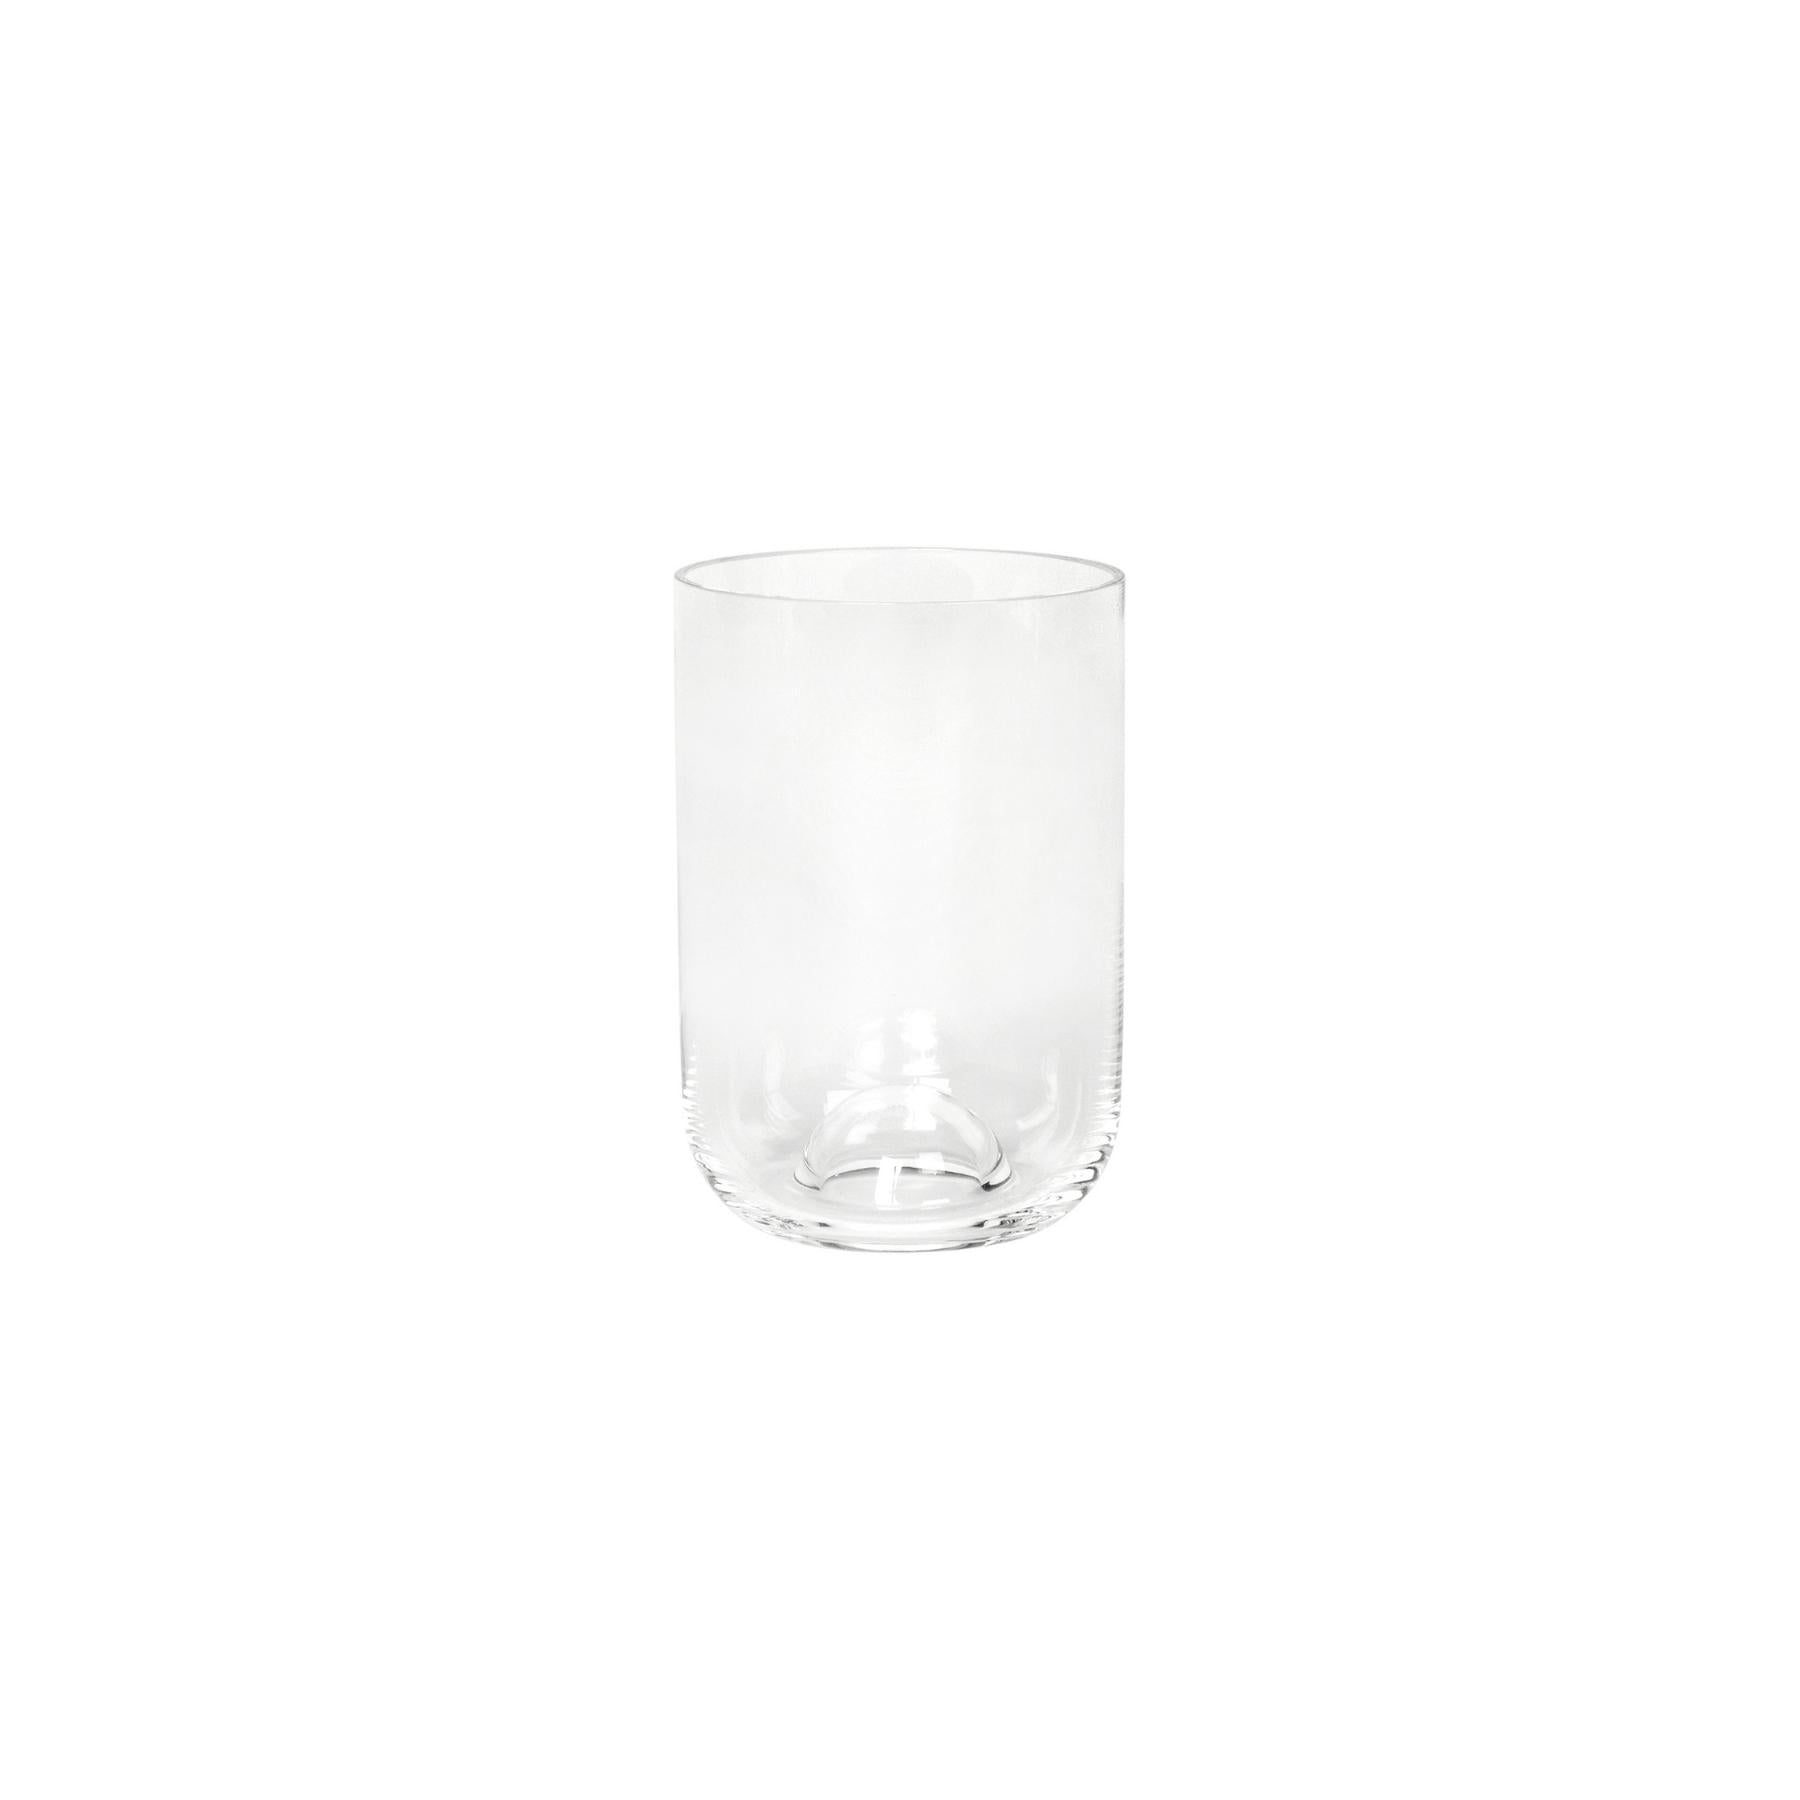 Capsule Drinking Glass - Large - Set of 4 - THAT COOL LIVING